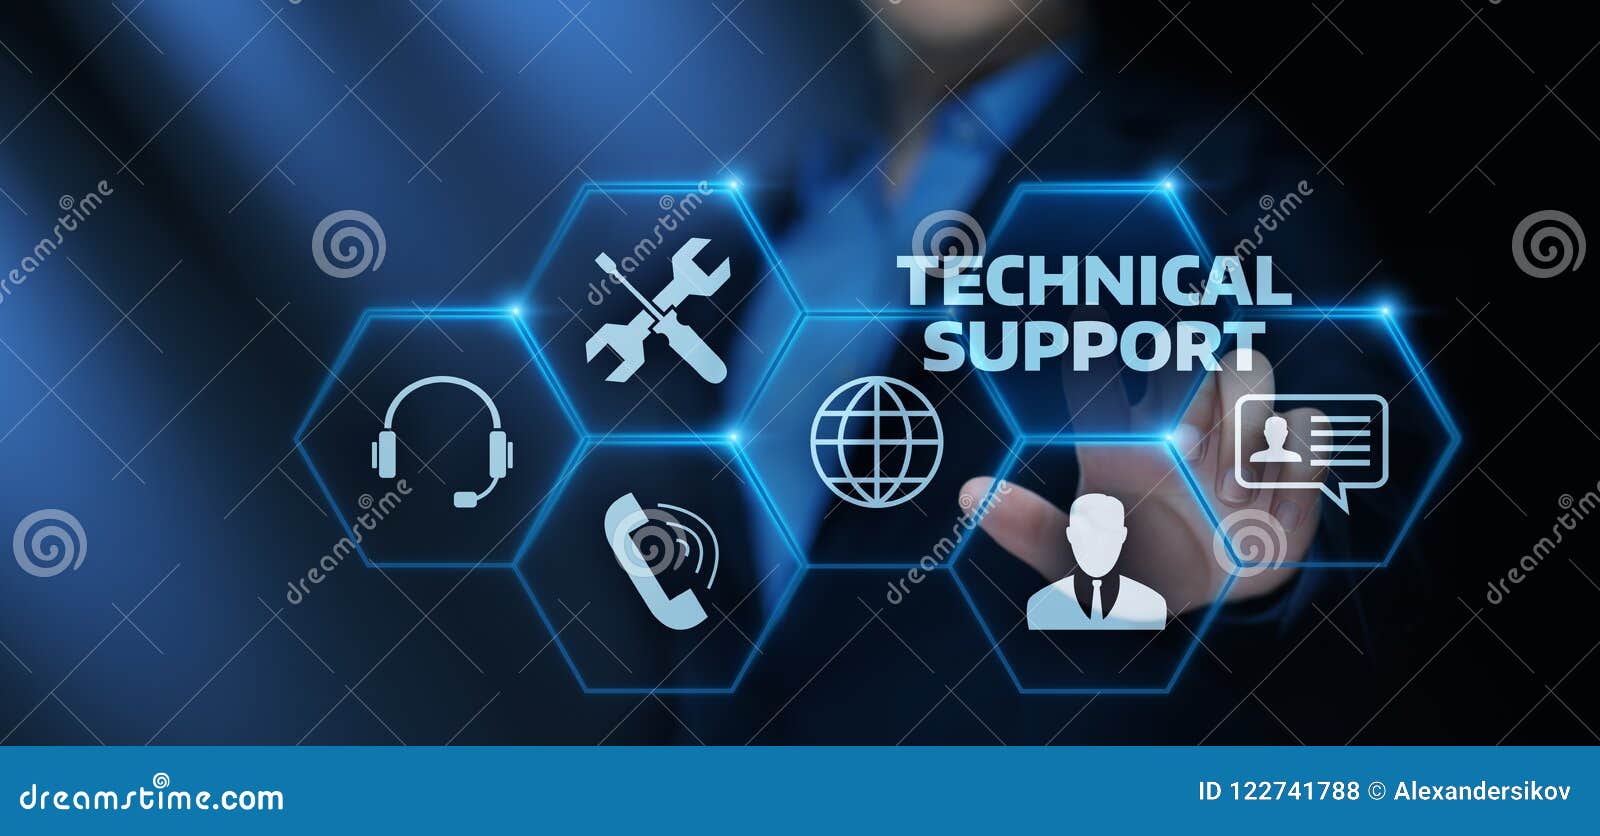 technical support customer service business technology internet concept